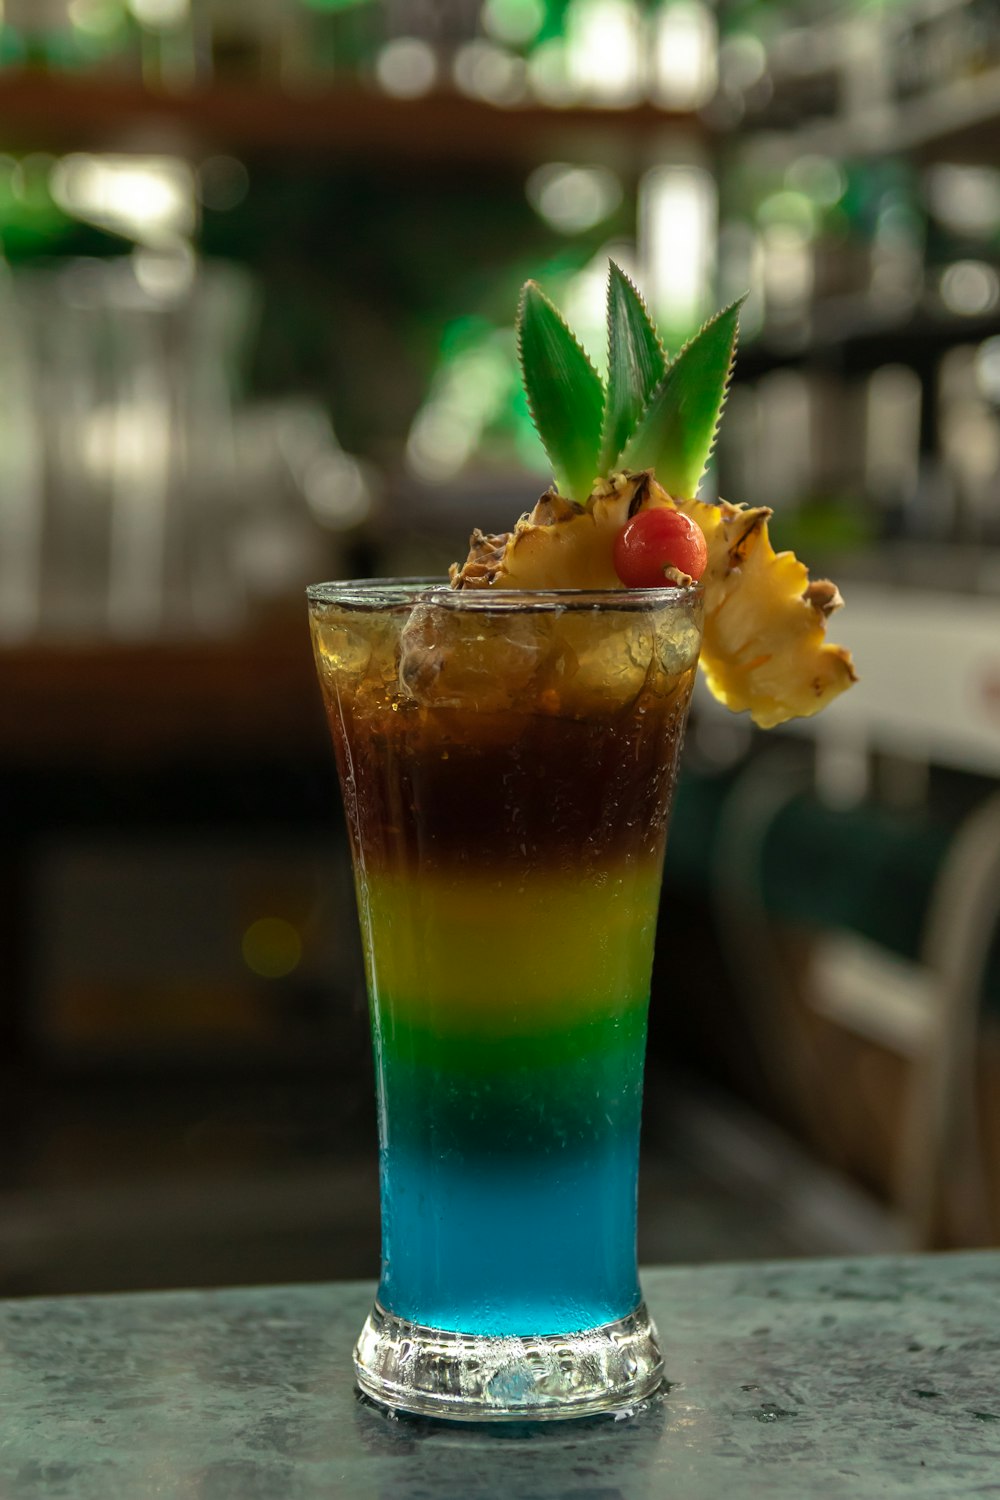 a tall glass filled with a colorful drink